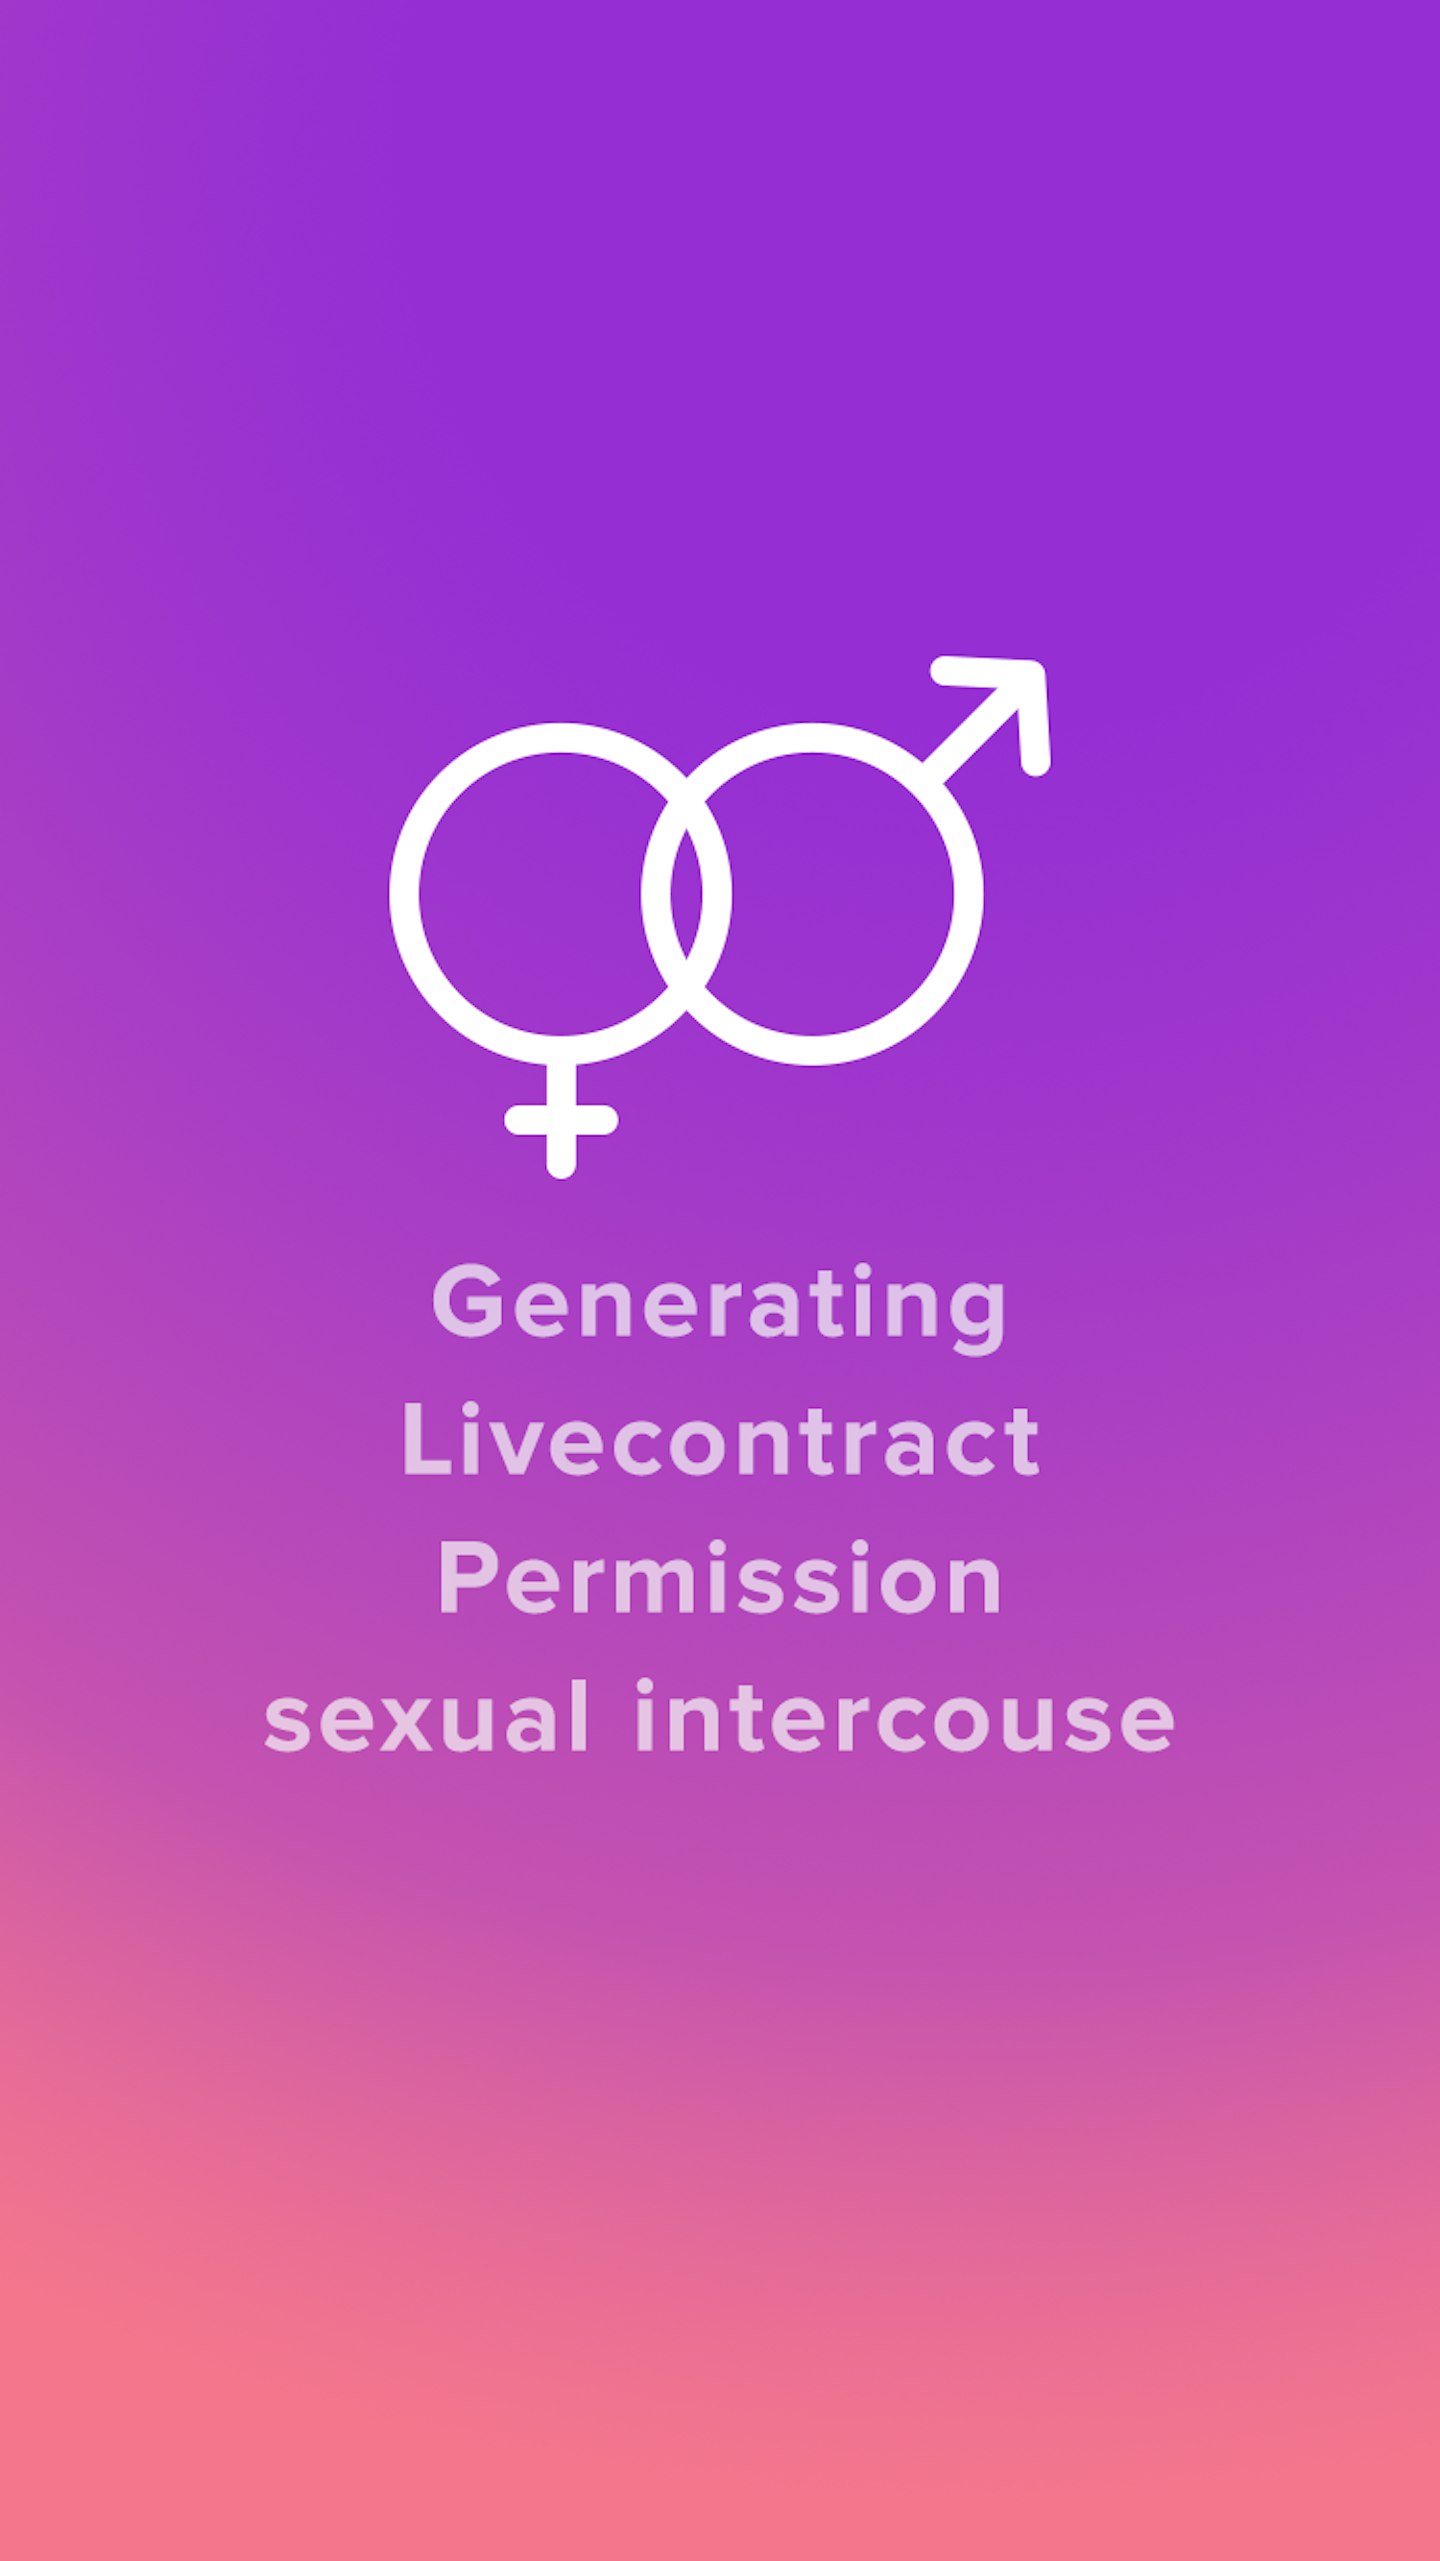 New Sexual Consent Contract App Is Weird And A Terrible Response To #MeToo